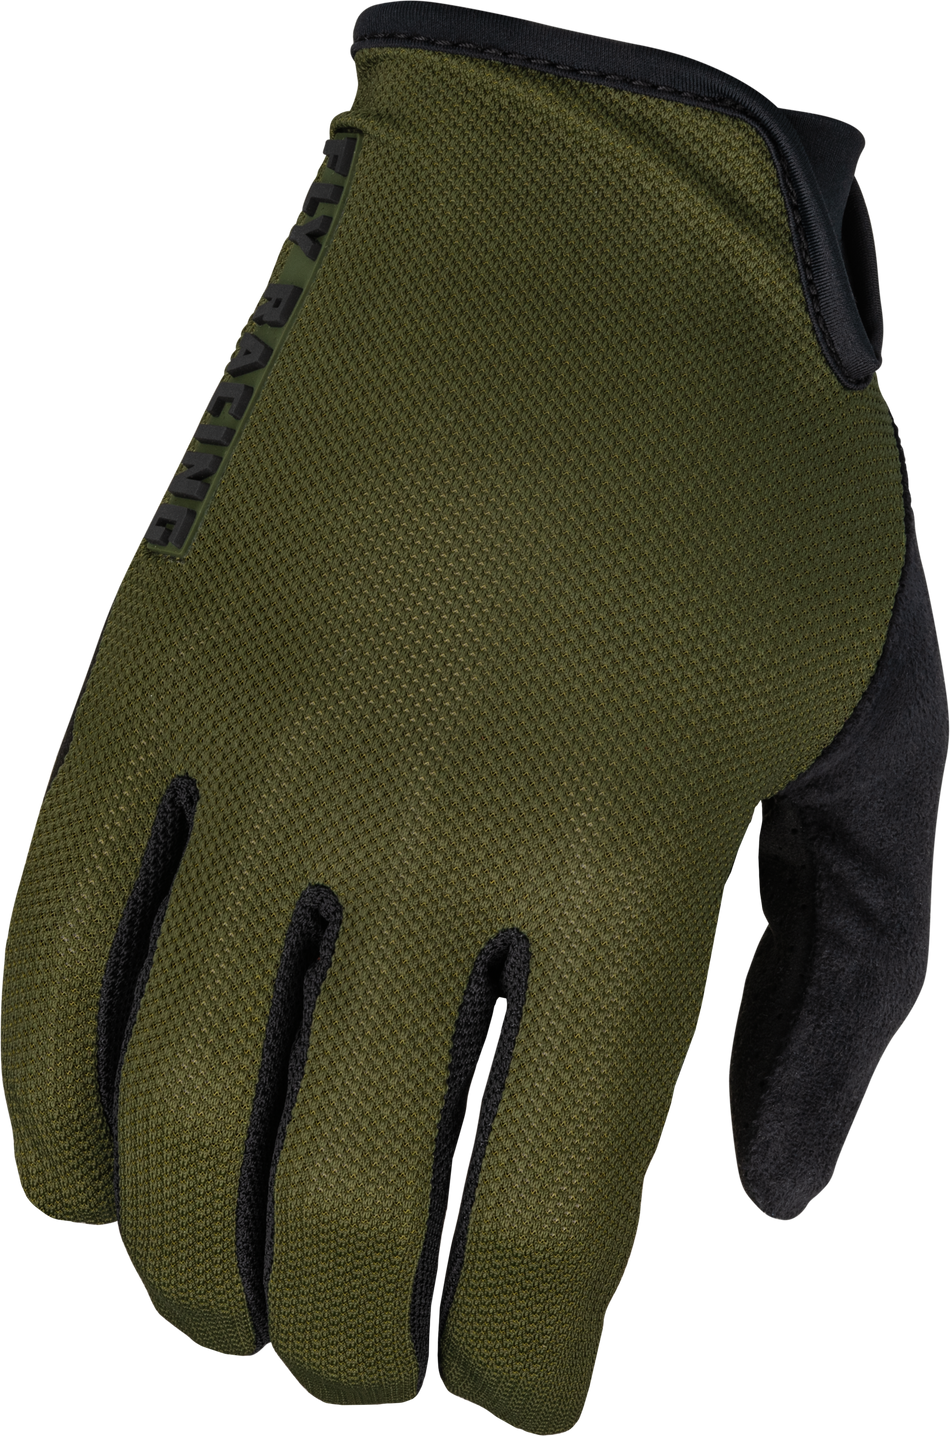 FLY RACING Mesh Gloves Dark Forest Md 375-305M